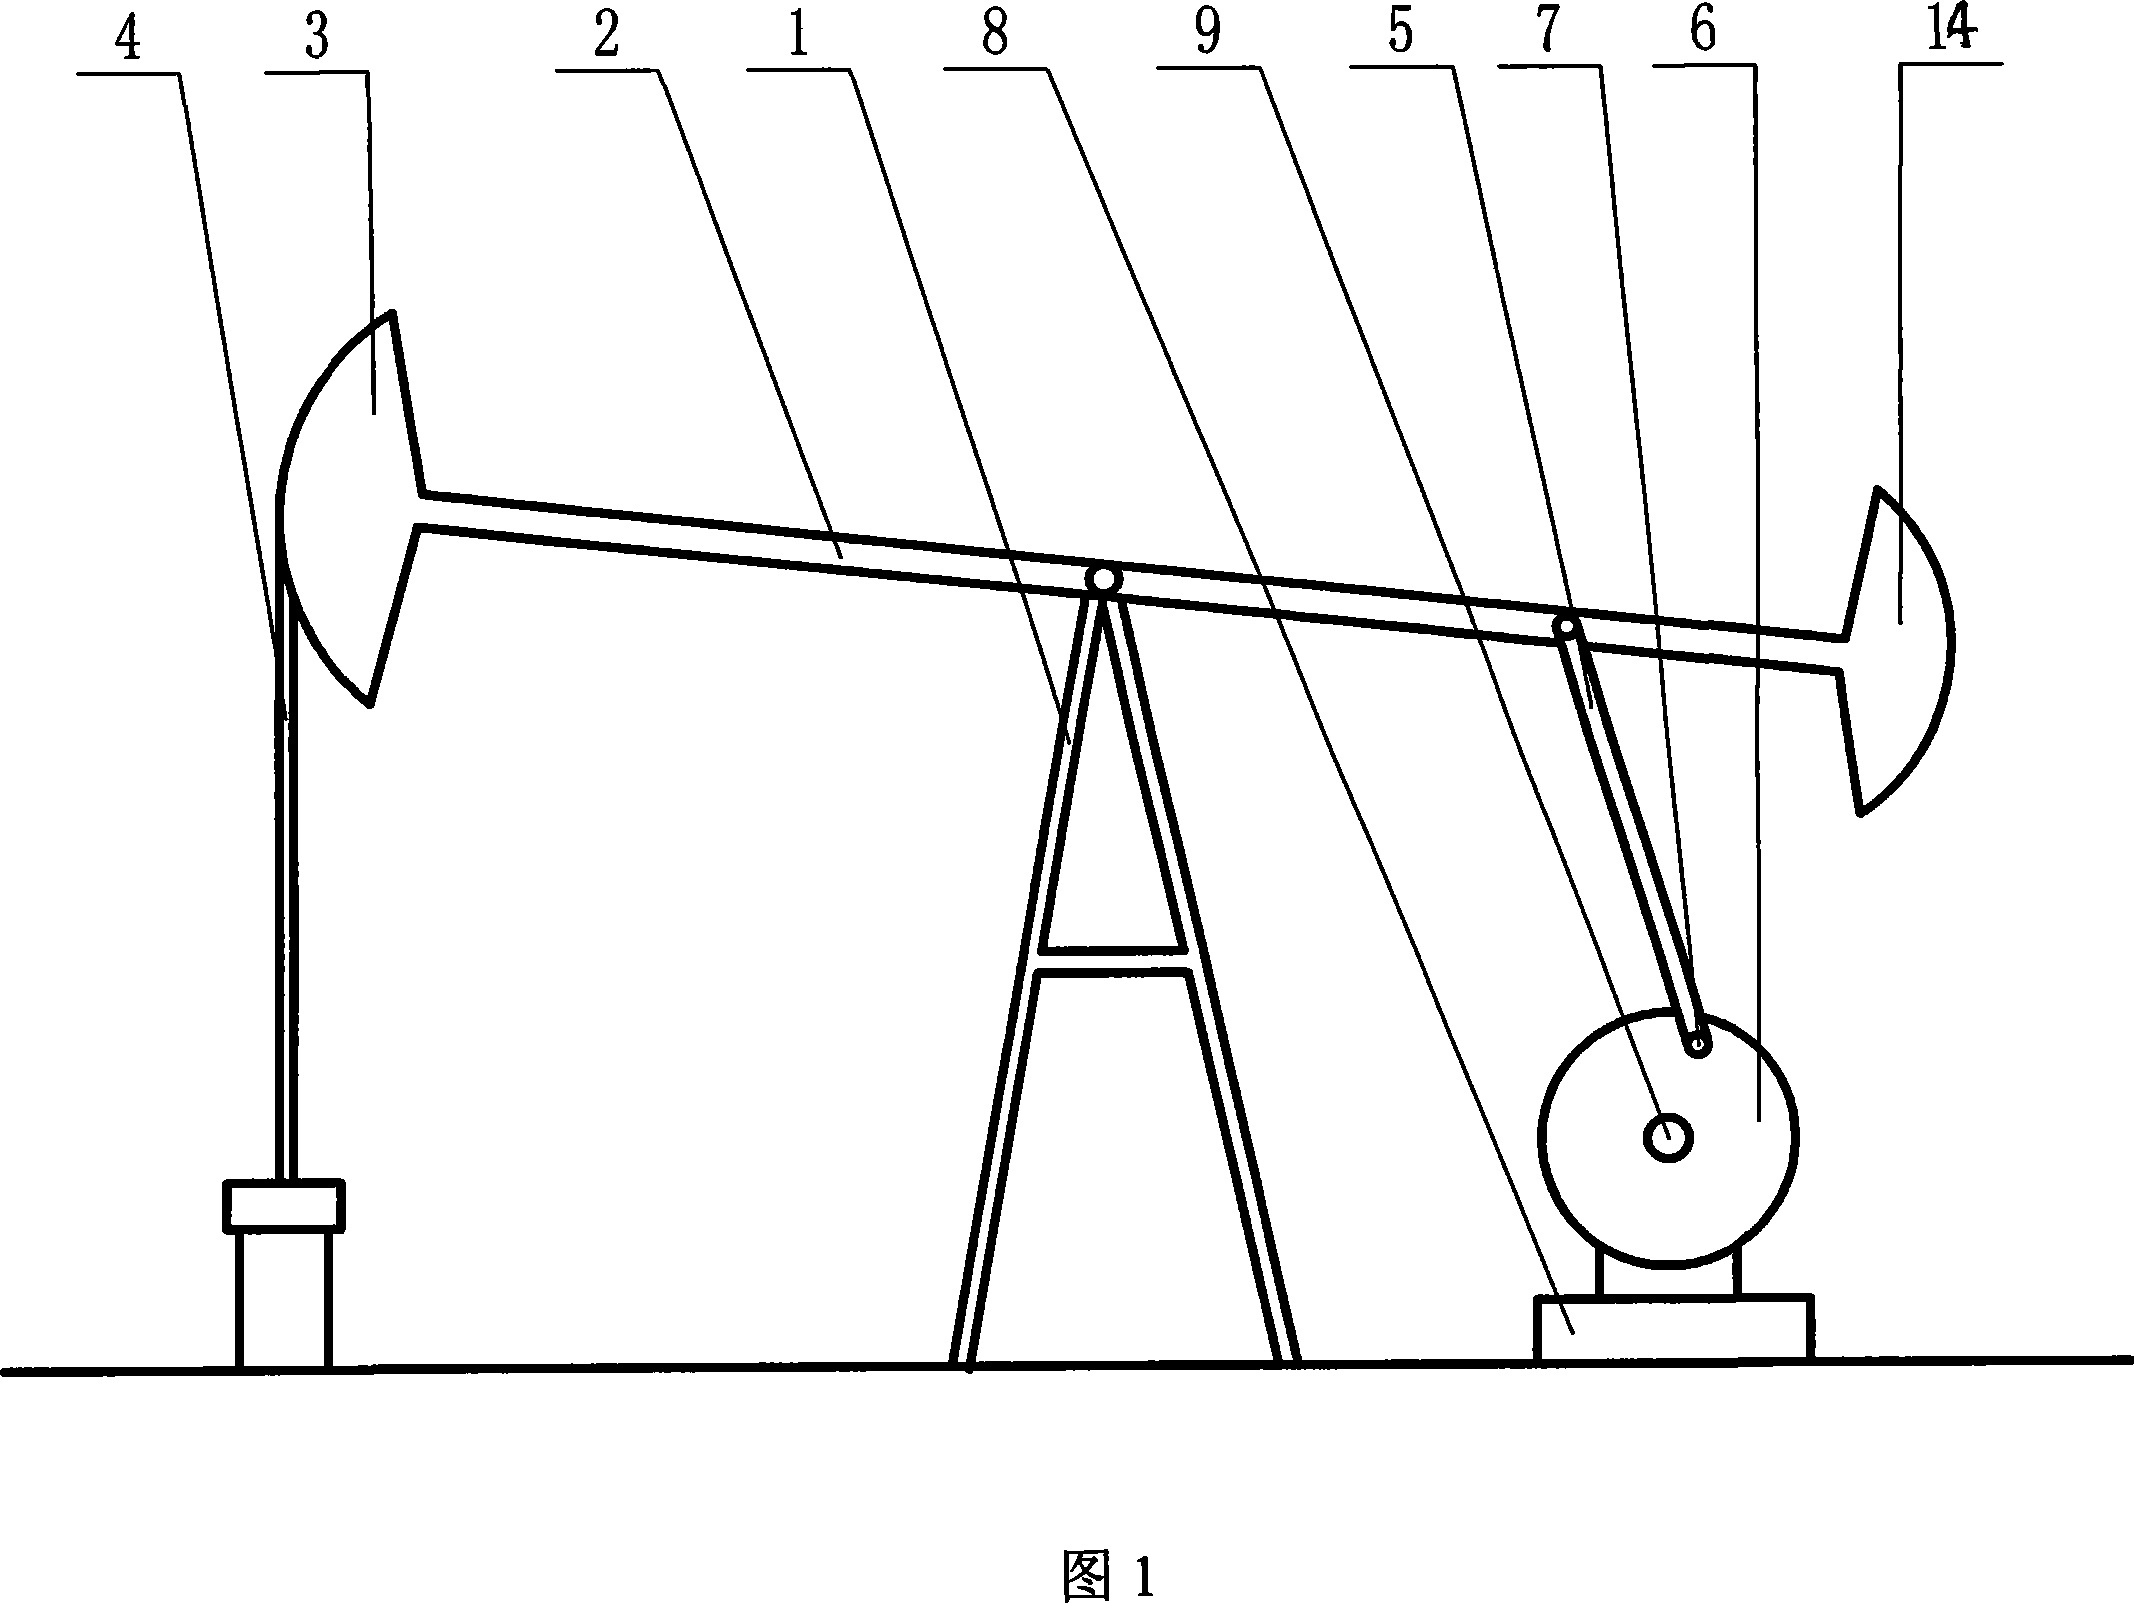 Motor driven pumping unit with two dish surfaces